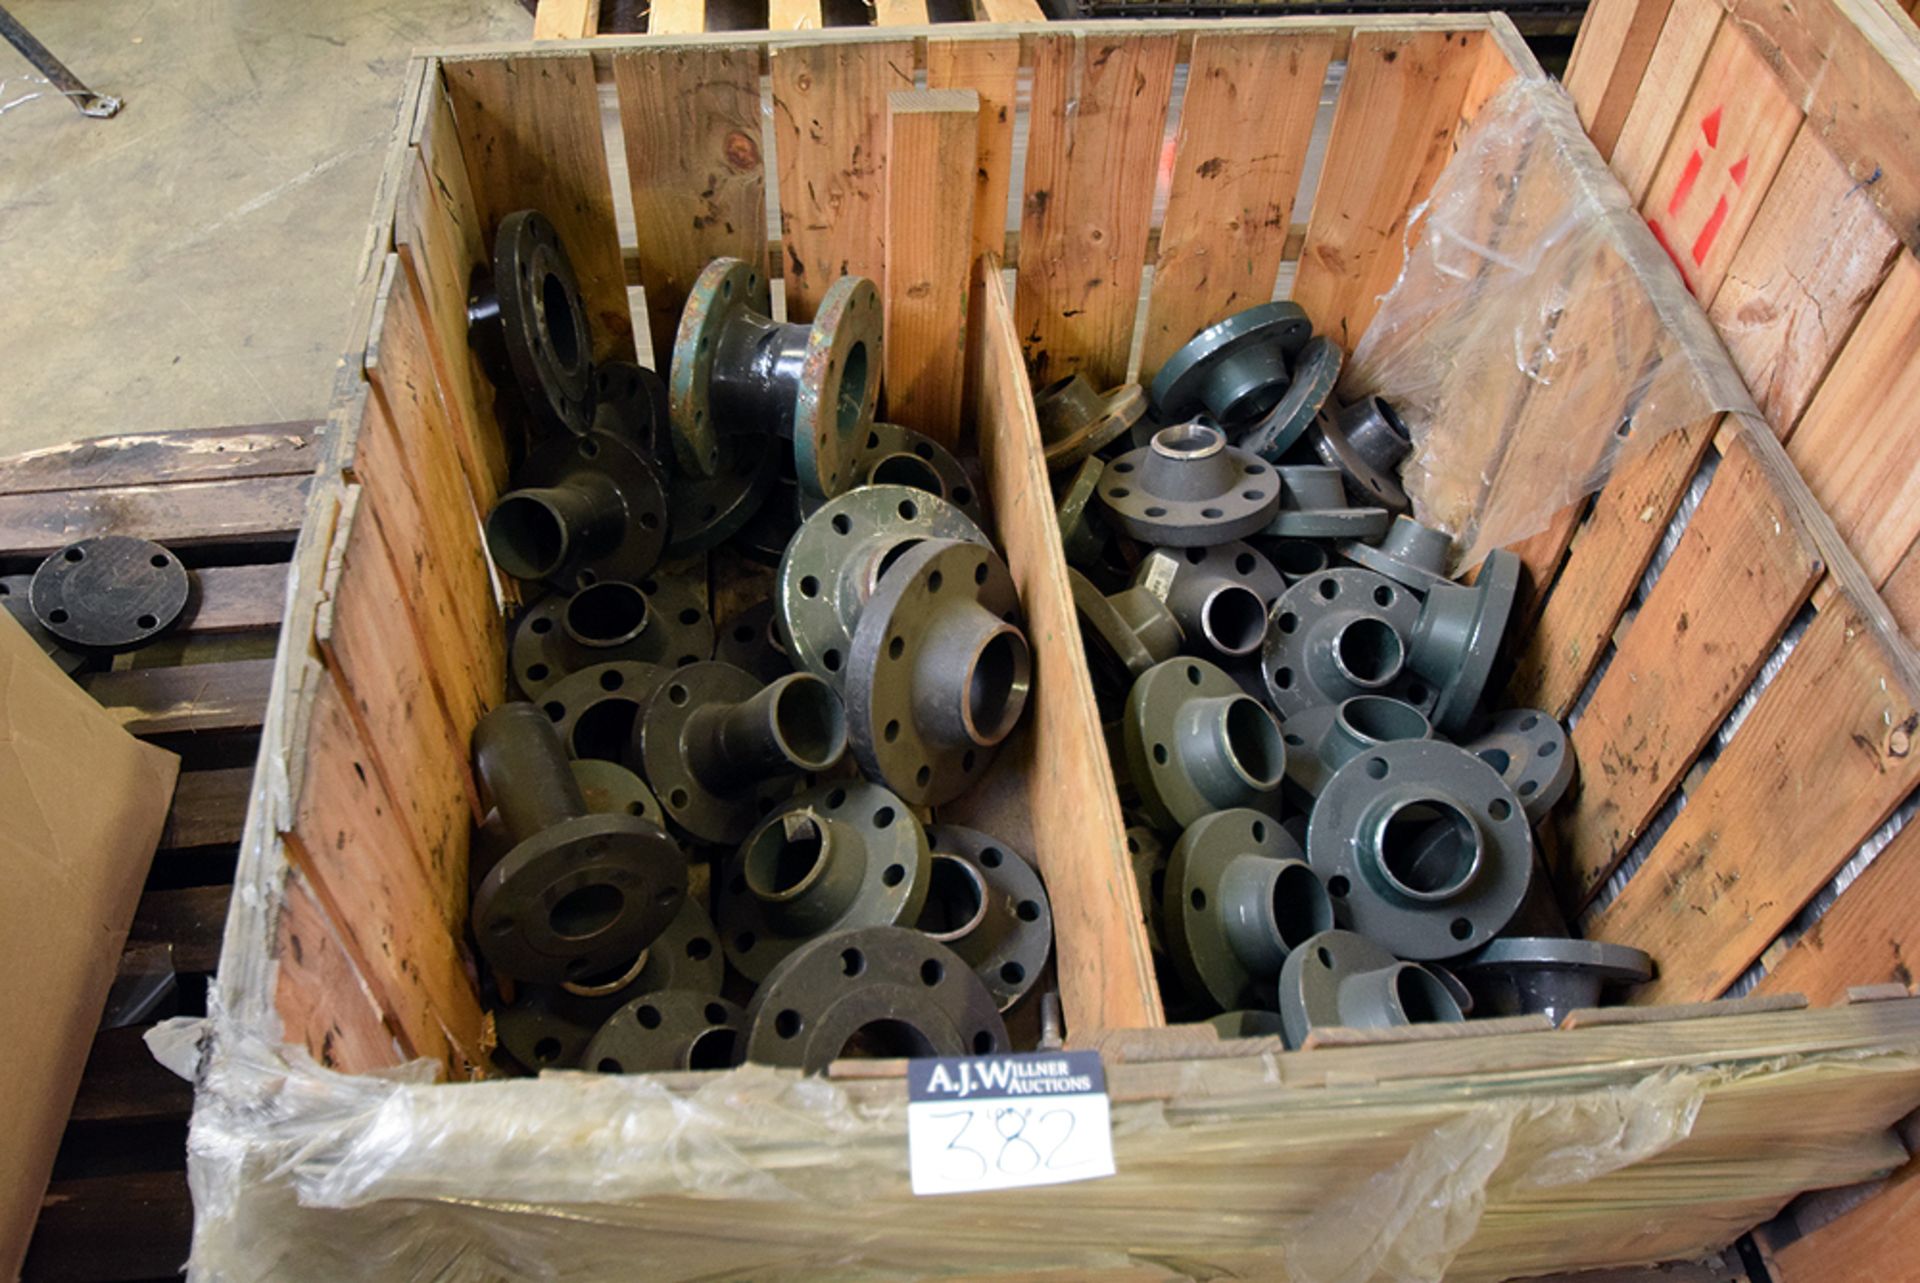 A Group of Black & Green Steel Buttweld Fittings & Flanges, 3" to 10" (on 6 pallets & Rolling Cart) - Image 6 of 8